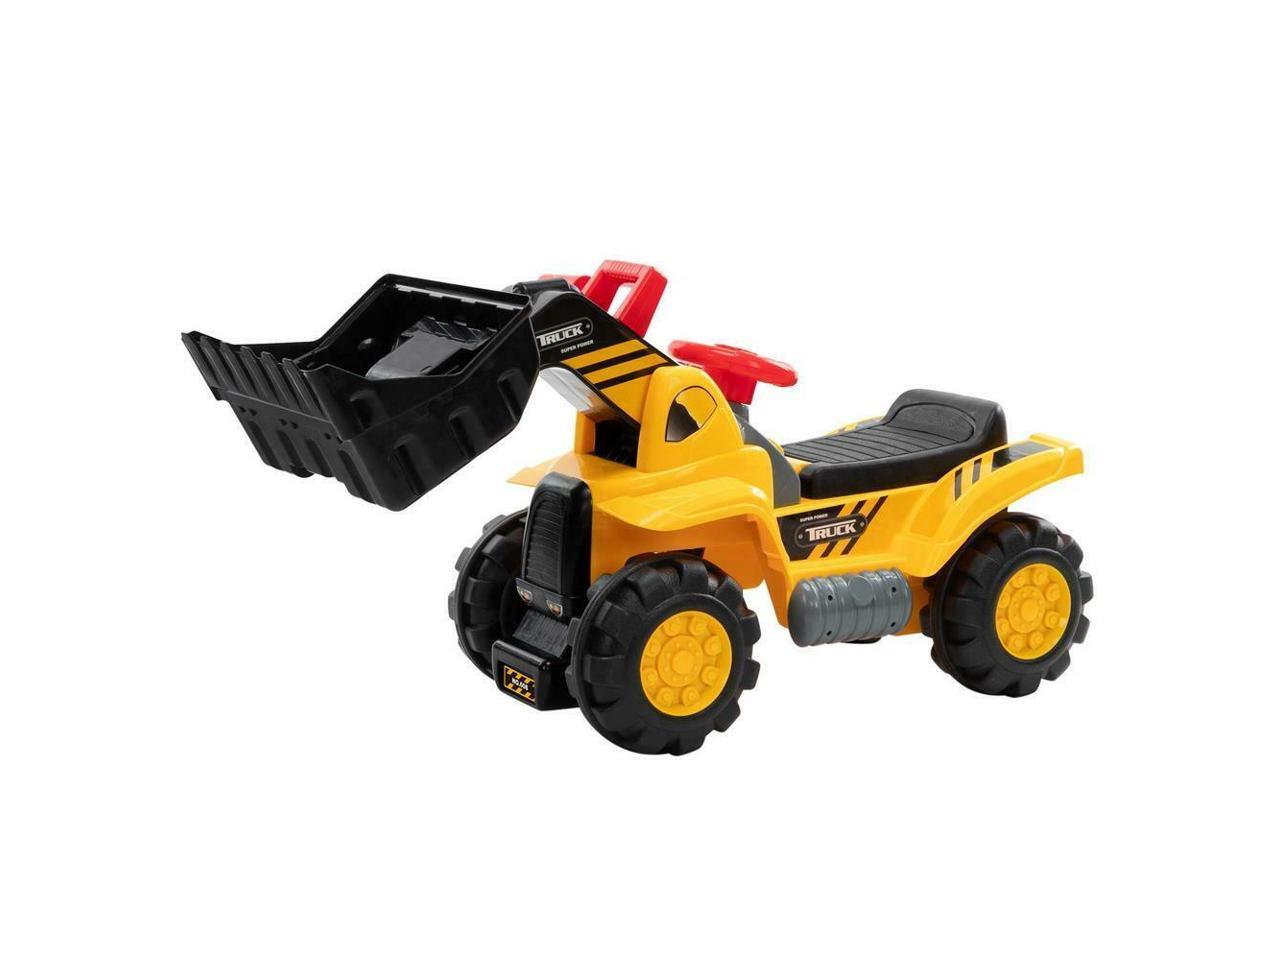 LEADZM Ride On Bulldozer Tractor Pulling Cart Pretend Play Construction Truck